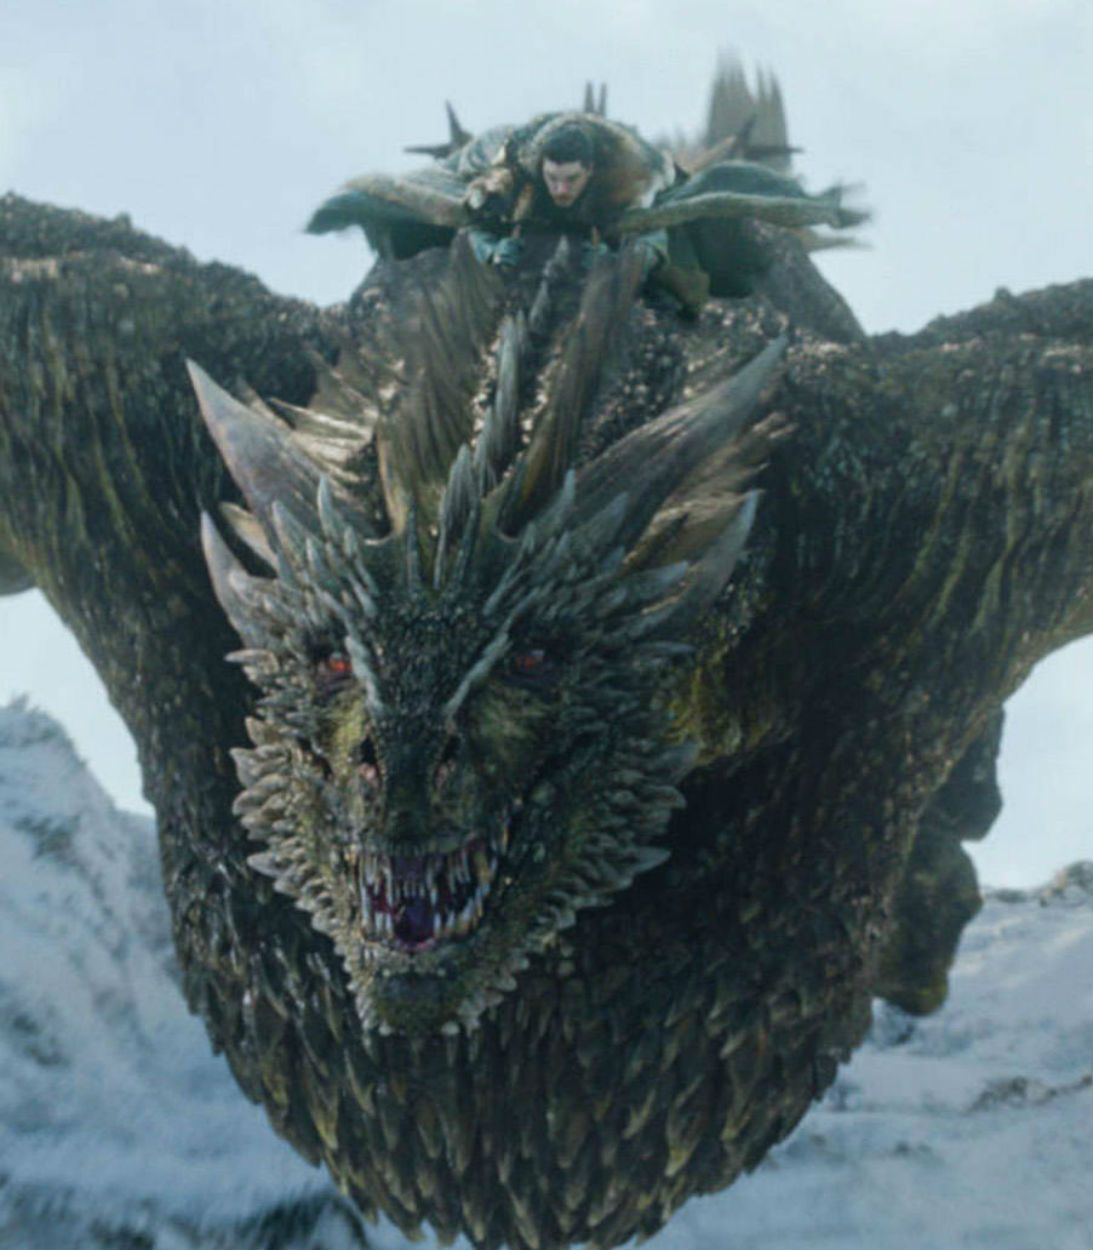 Jon riding Rhaegal for the first time